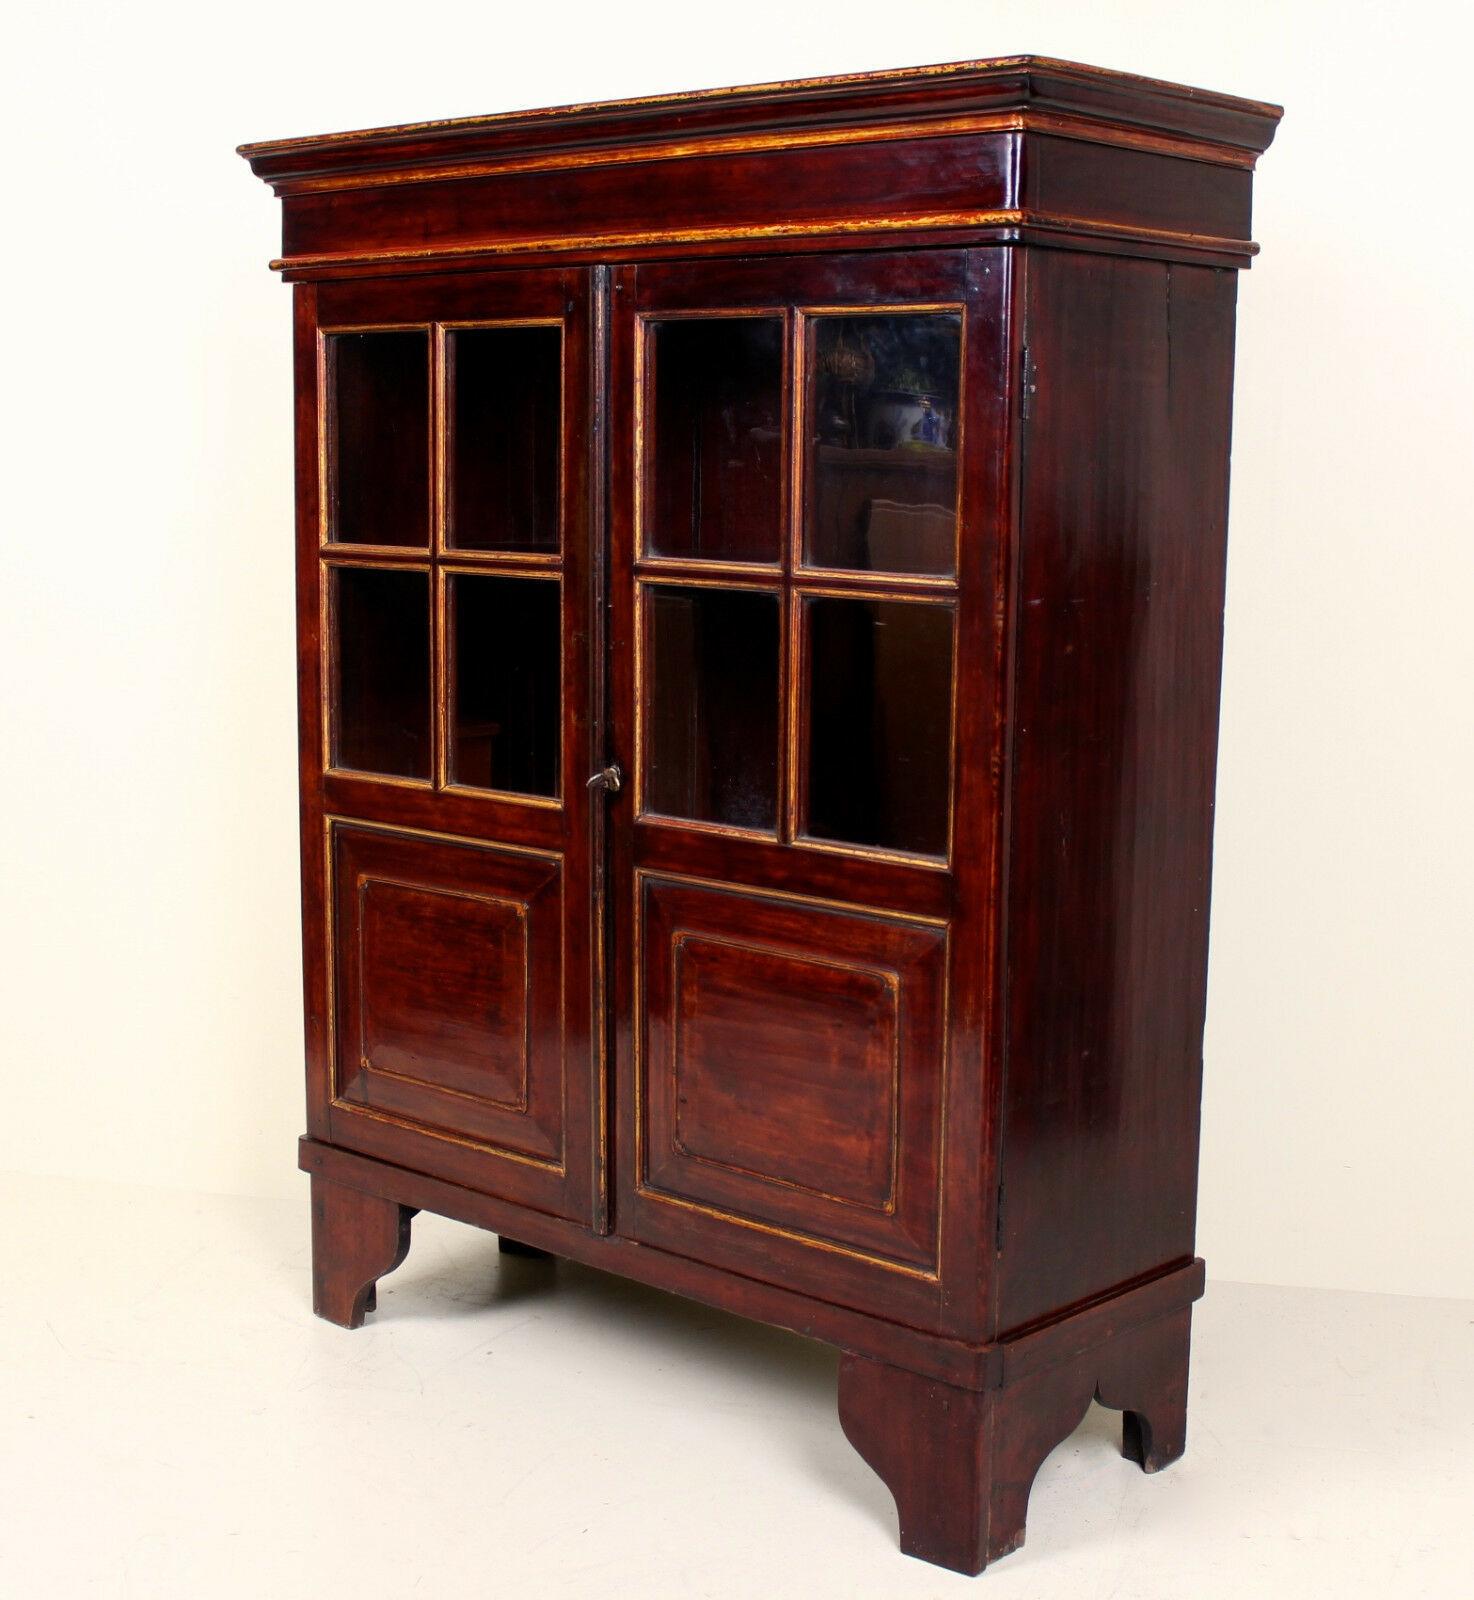 An impressive Chinese lacquered glazed bookcase.

The flared cornice above astragal glazed paneled doors enclosed shelving and storage and raised on carved bracket feet.

Complete with original key: the lock mechanisms in smooth working order.